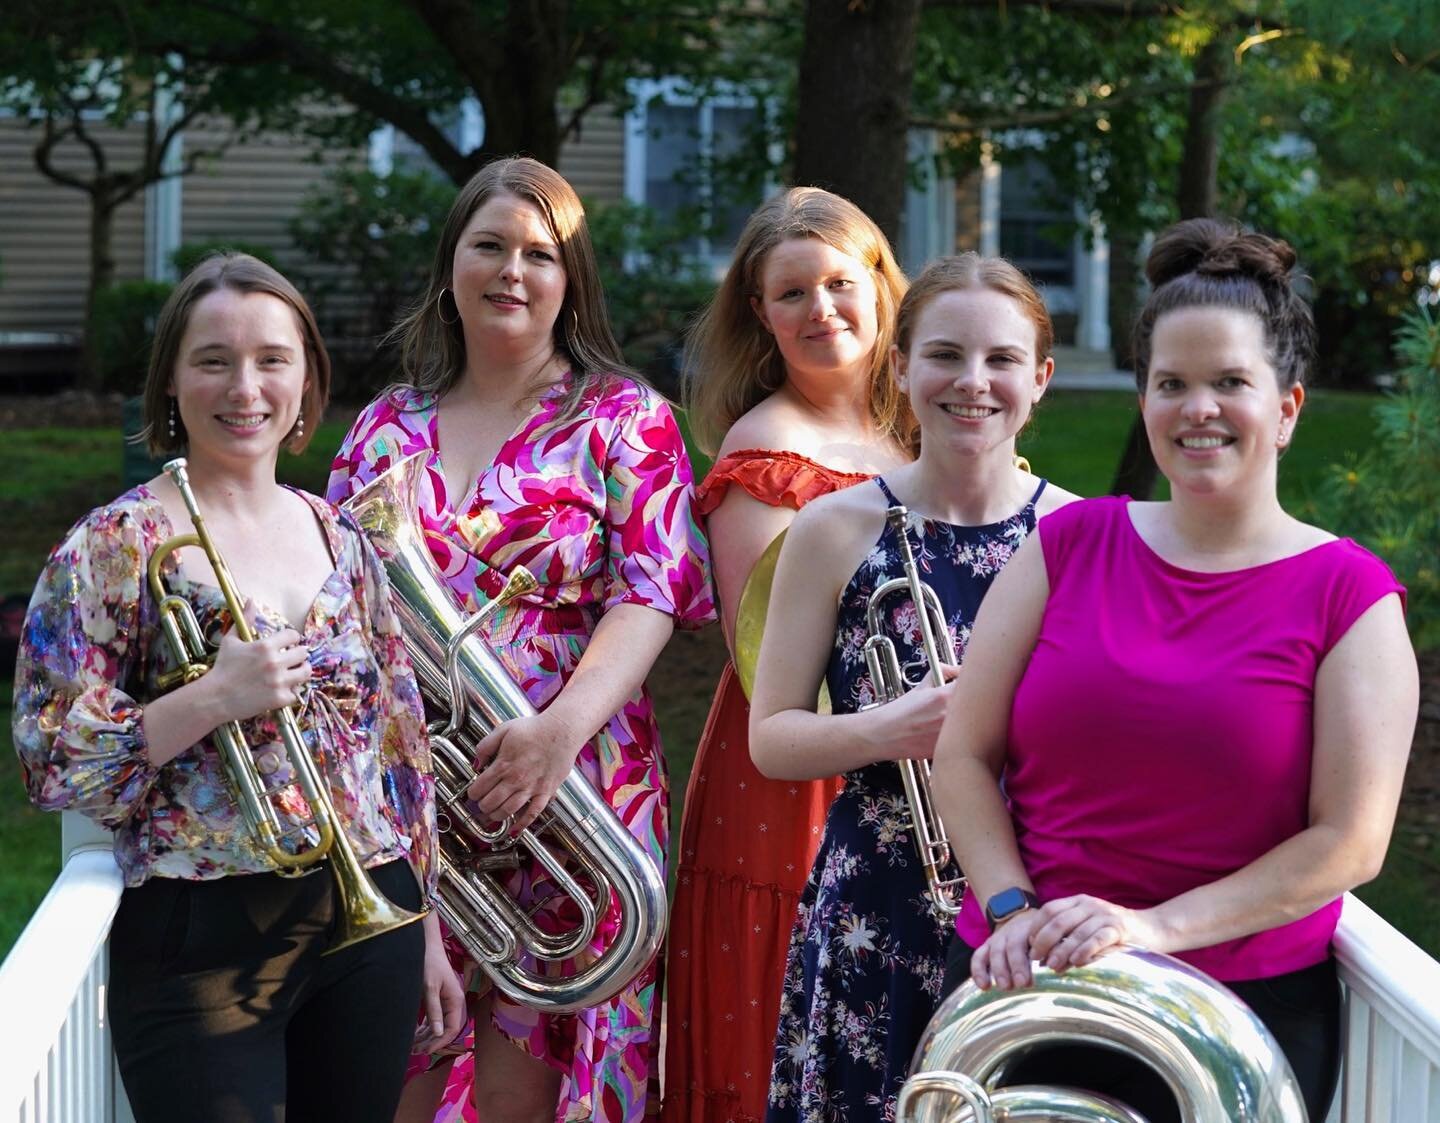 Brightening your feed with pops of color and strong women 💪🎶

#brassquintet #trumpet #horn #euphonium #tuba #womeninmusic #womenbrassplayers